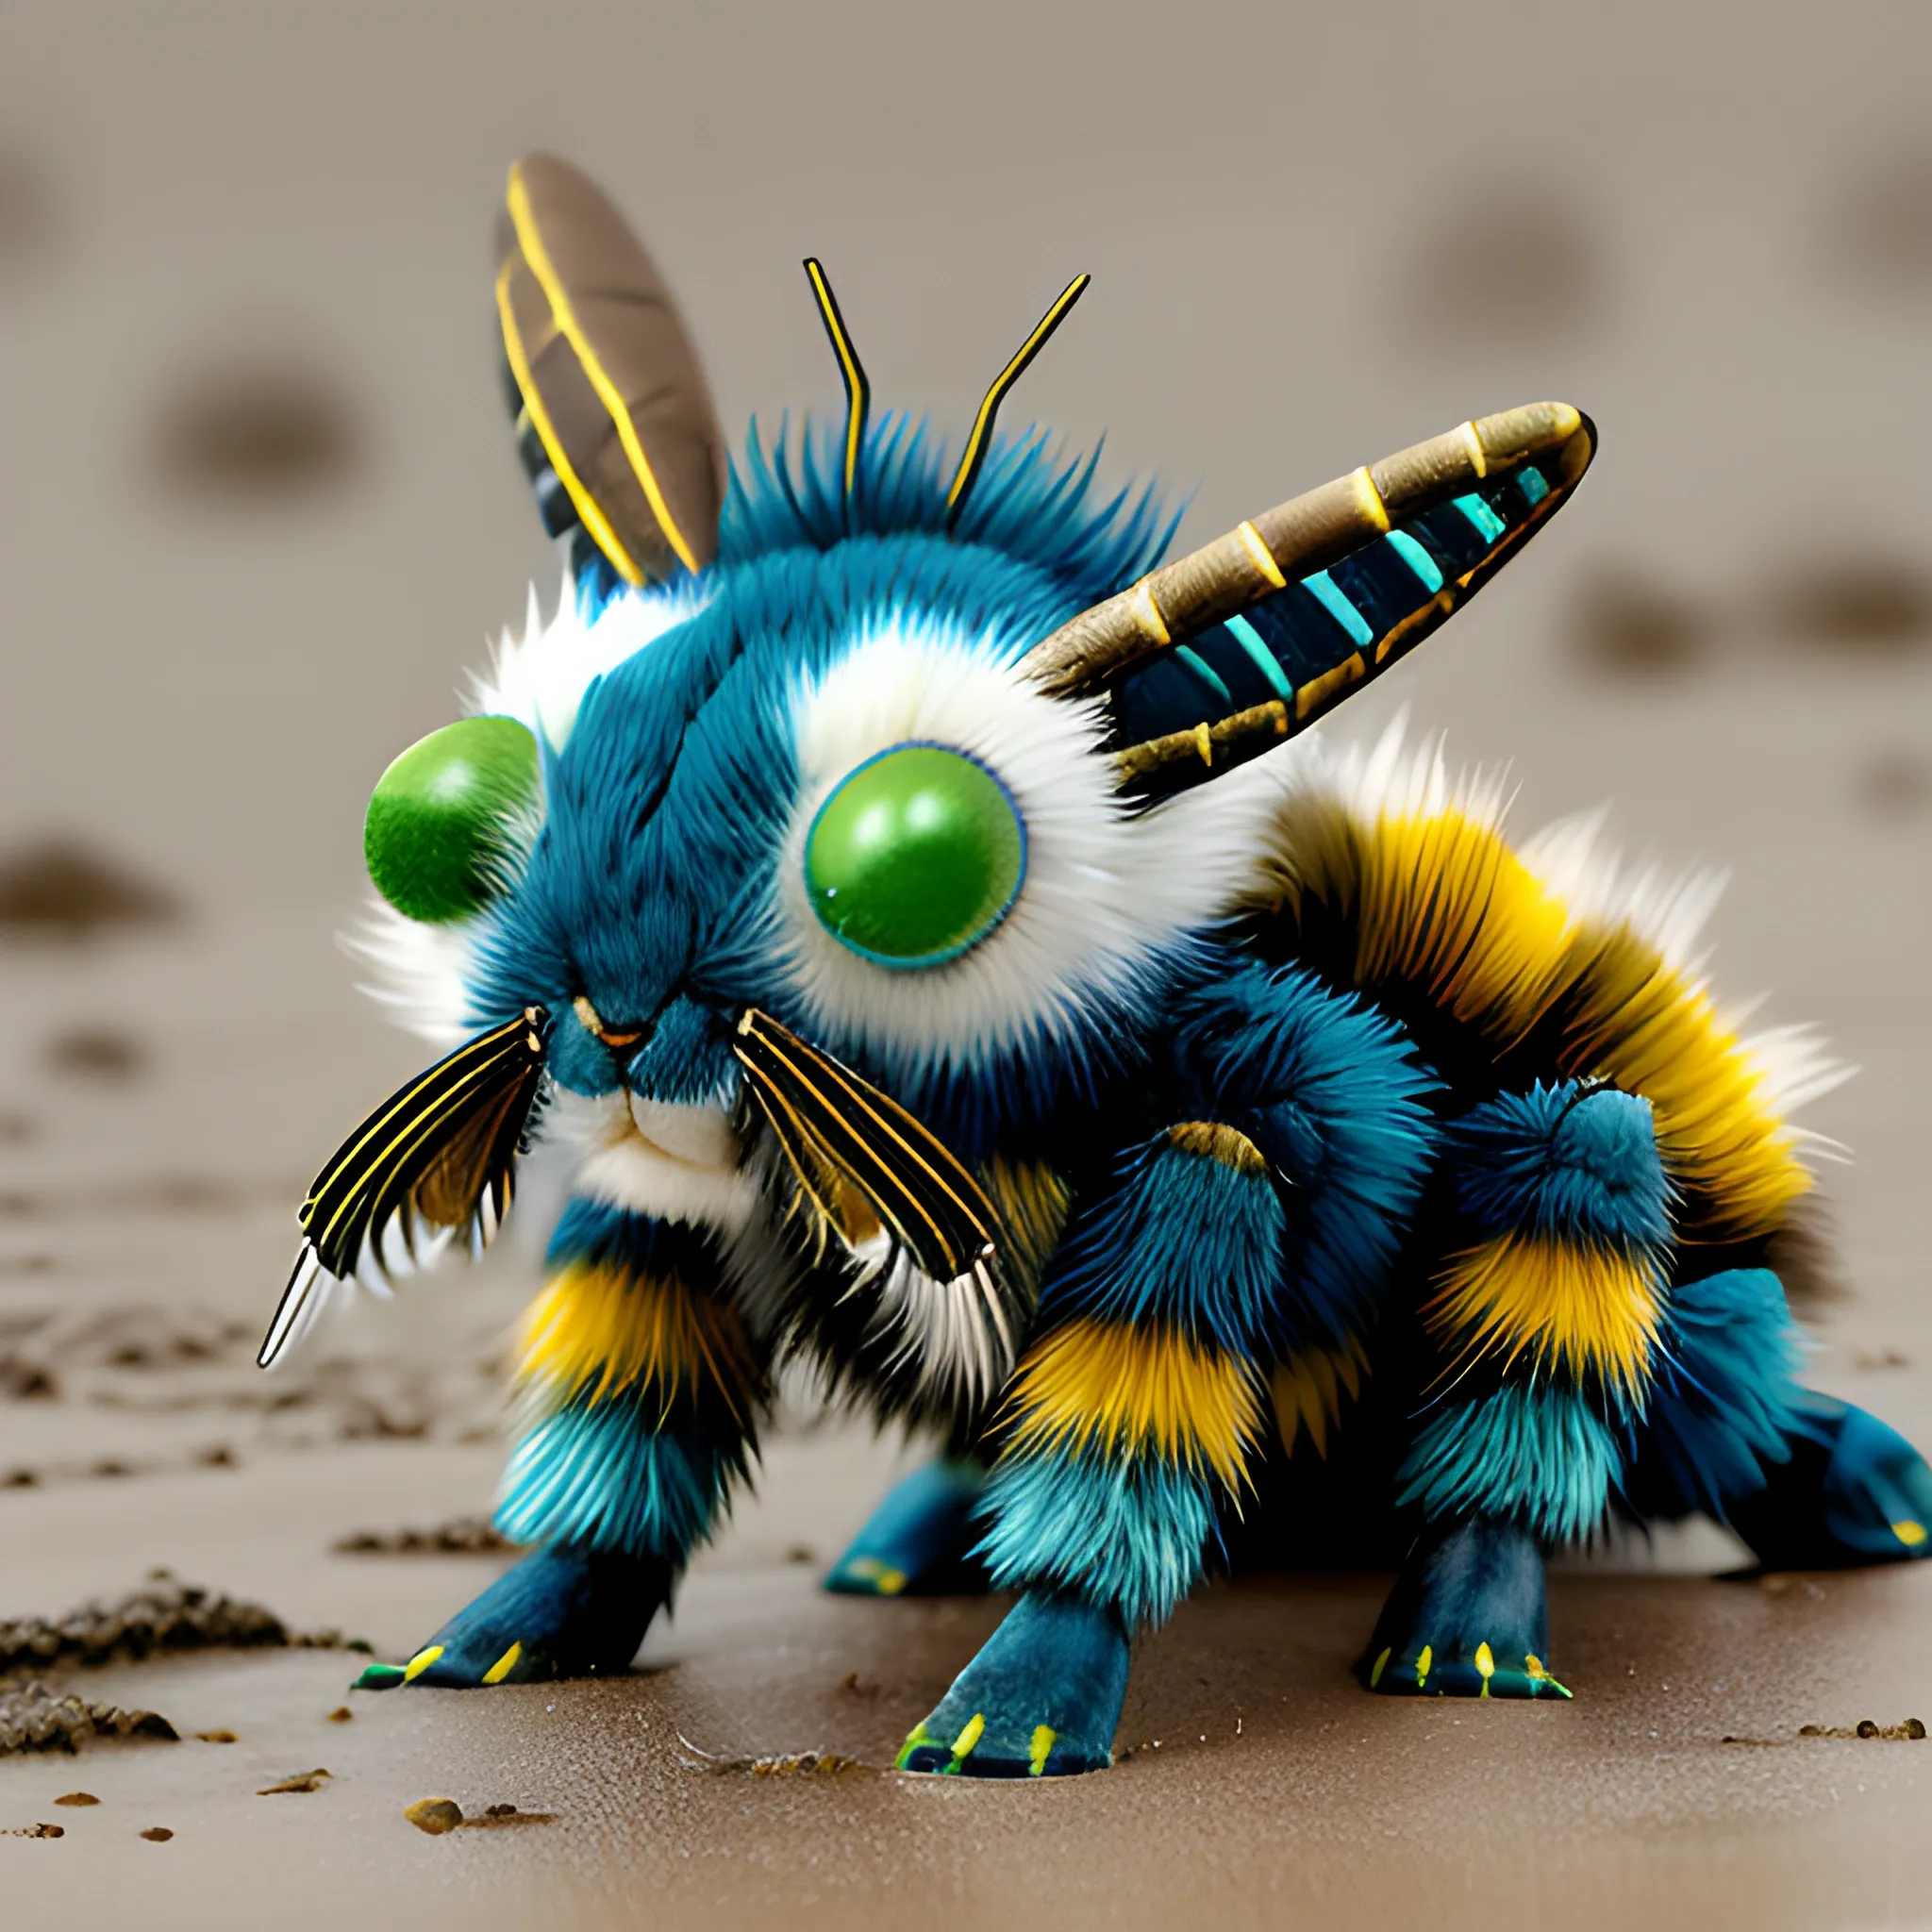 Insectile furry fluffy feline hybrid of rabbit and bumblebee, with blue and green and white stripes, with predatory mandibles and segmented body and six jointed legs with tube feet, on a muddy beach, very detailed